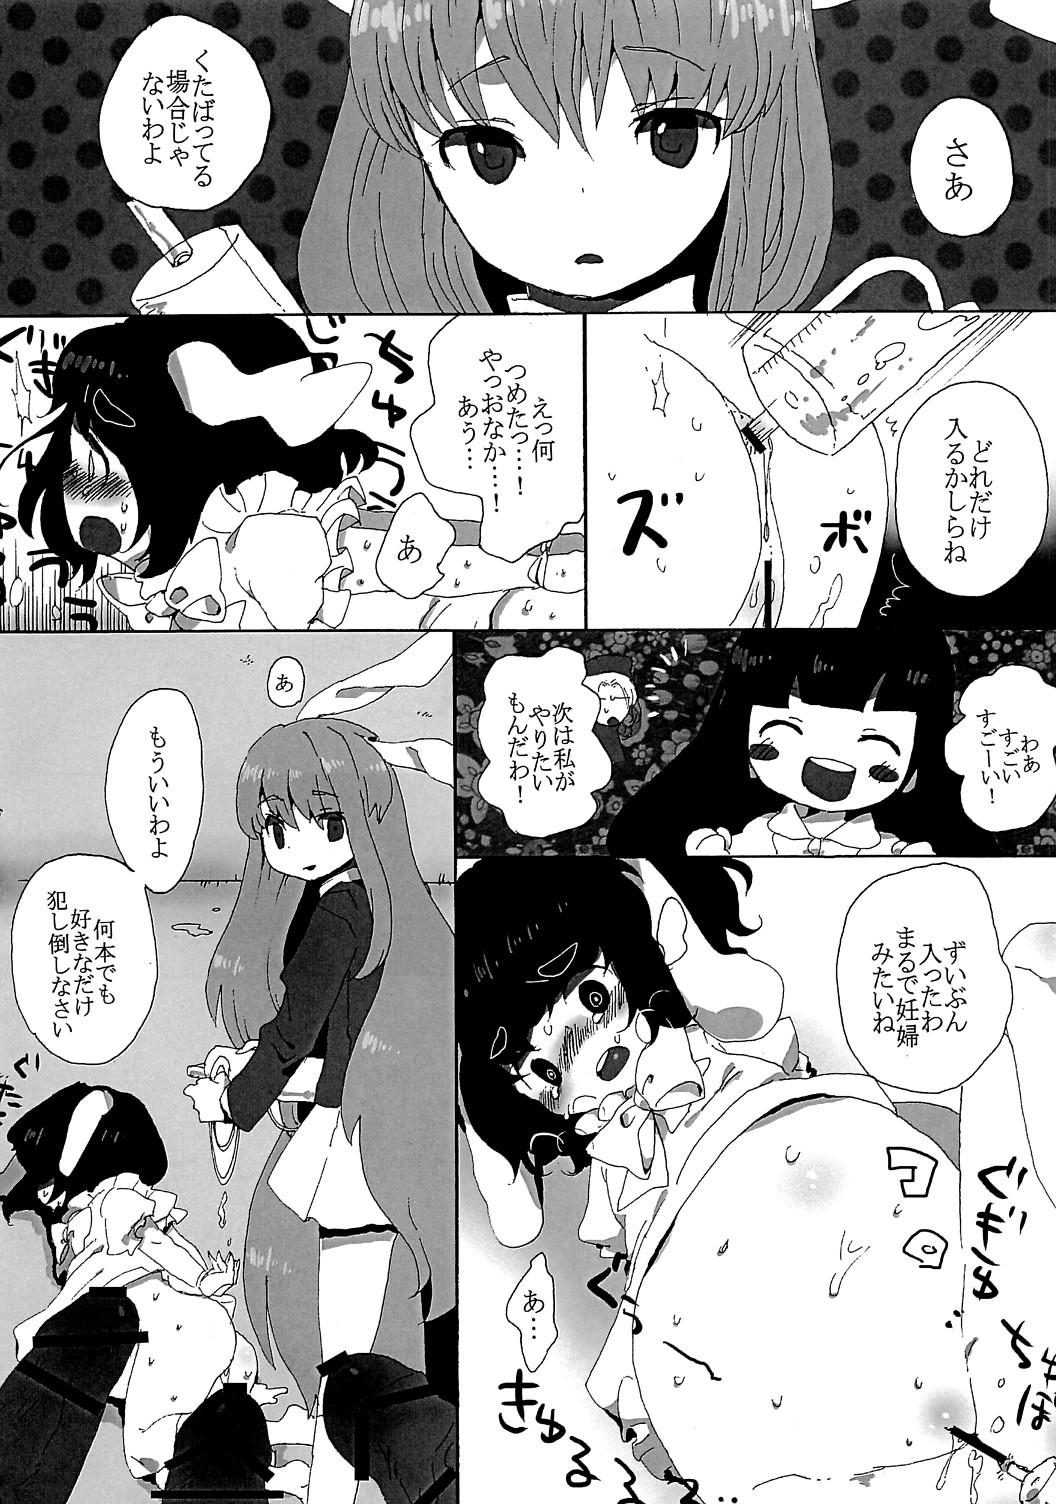 Novia rumor the second - Touhou project Japanese - Page 8